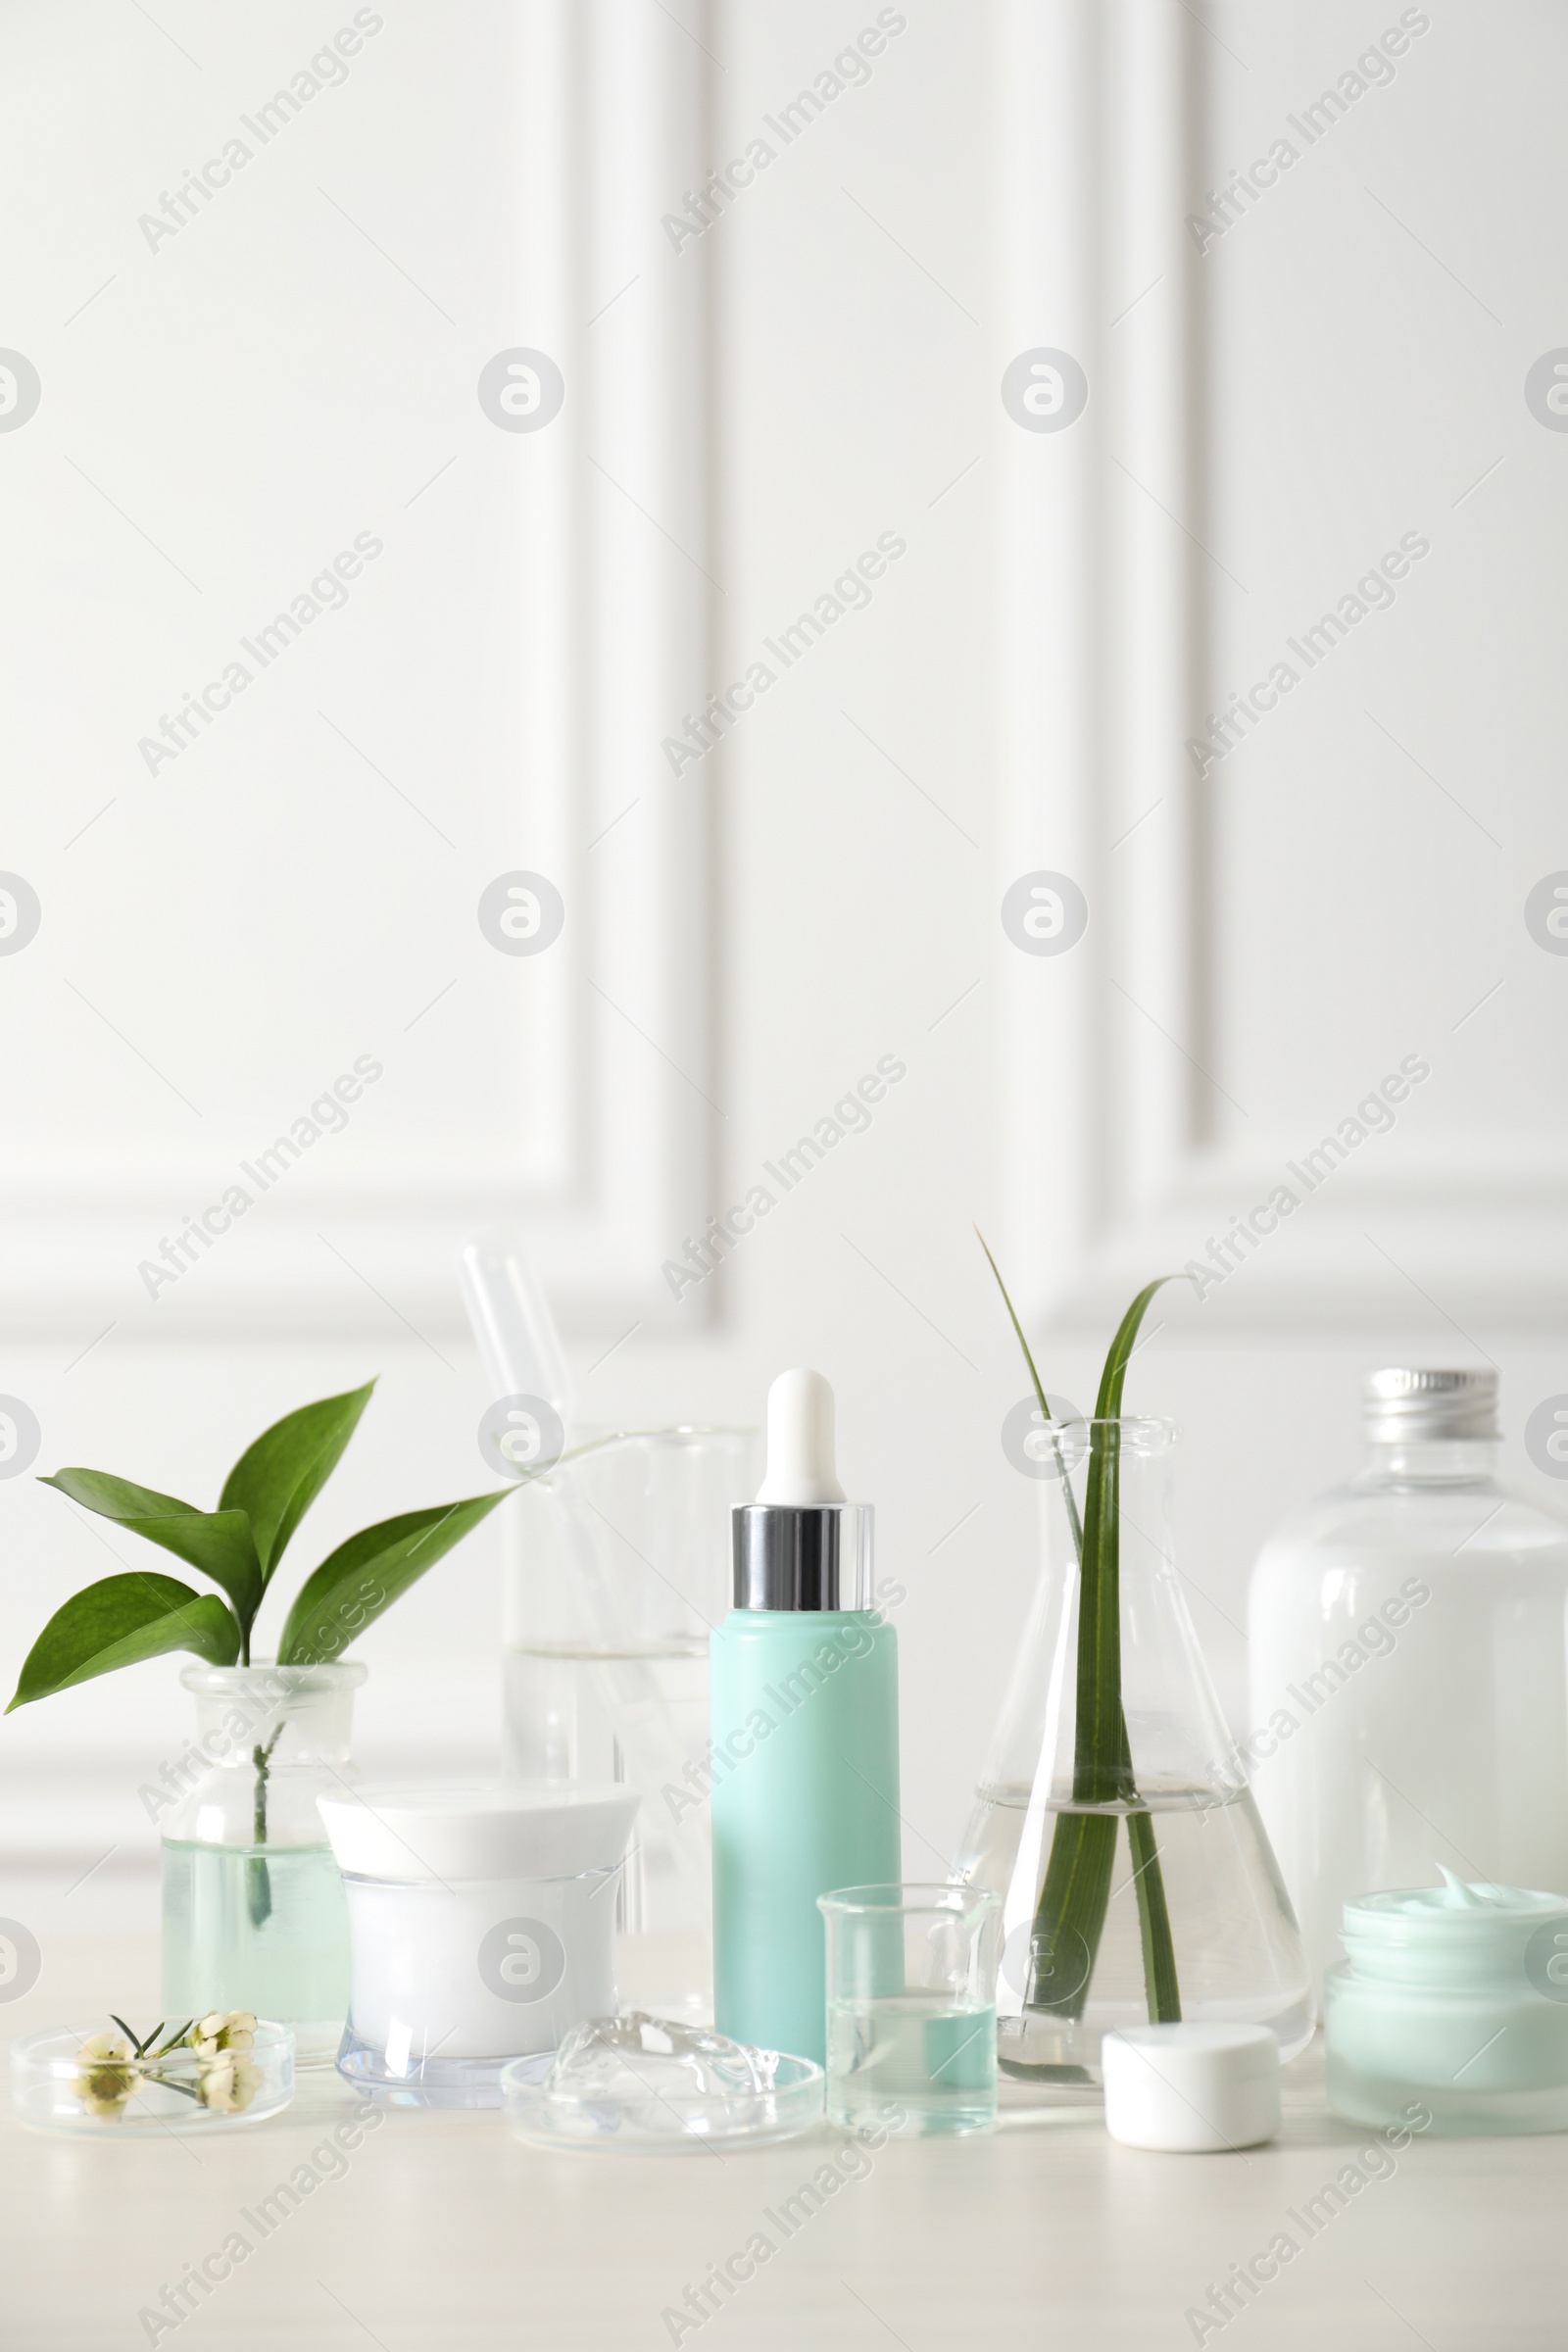 Photo of Natural ingredients for cosmetic products and laboratory glassware on white table